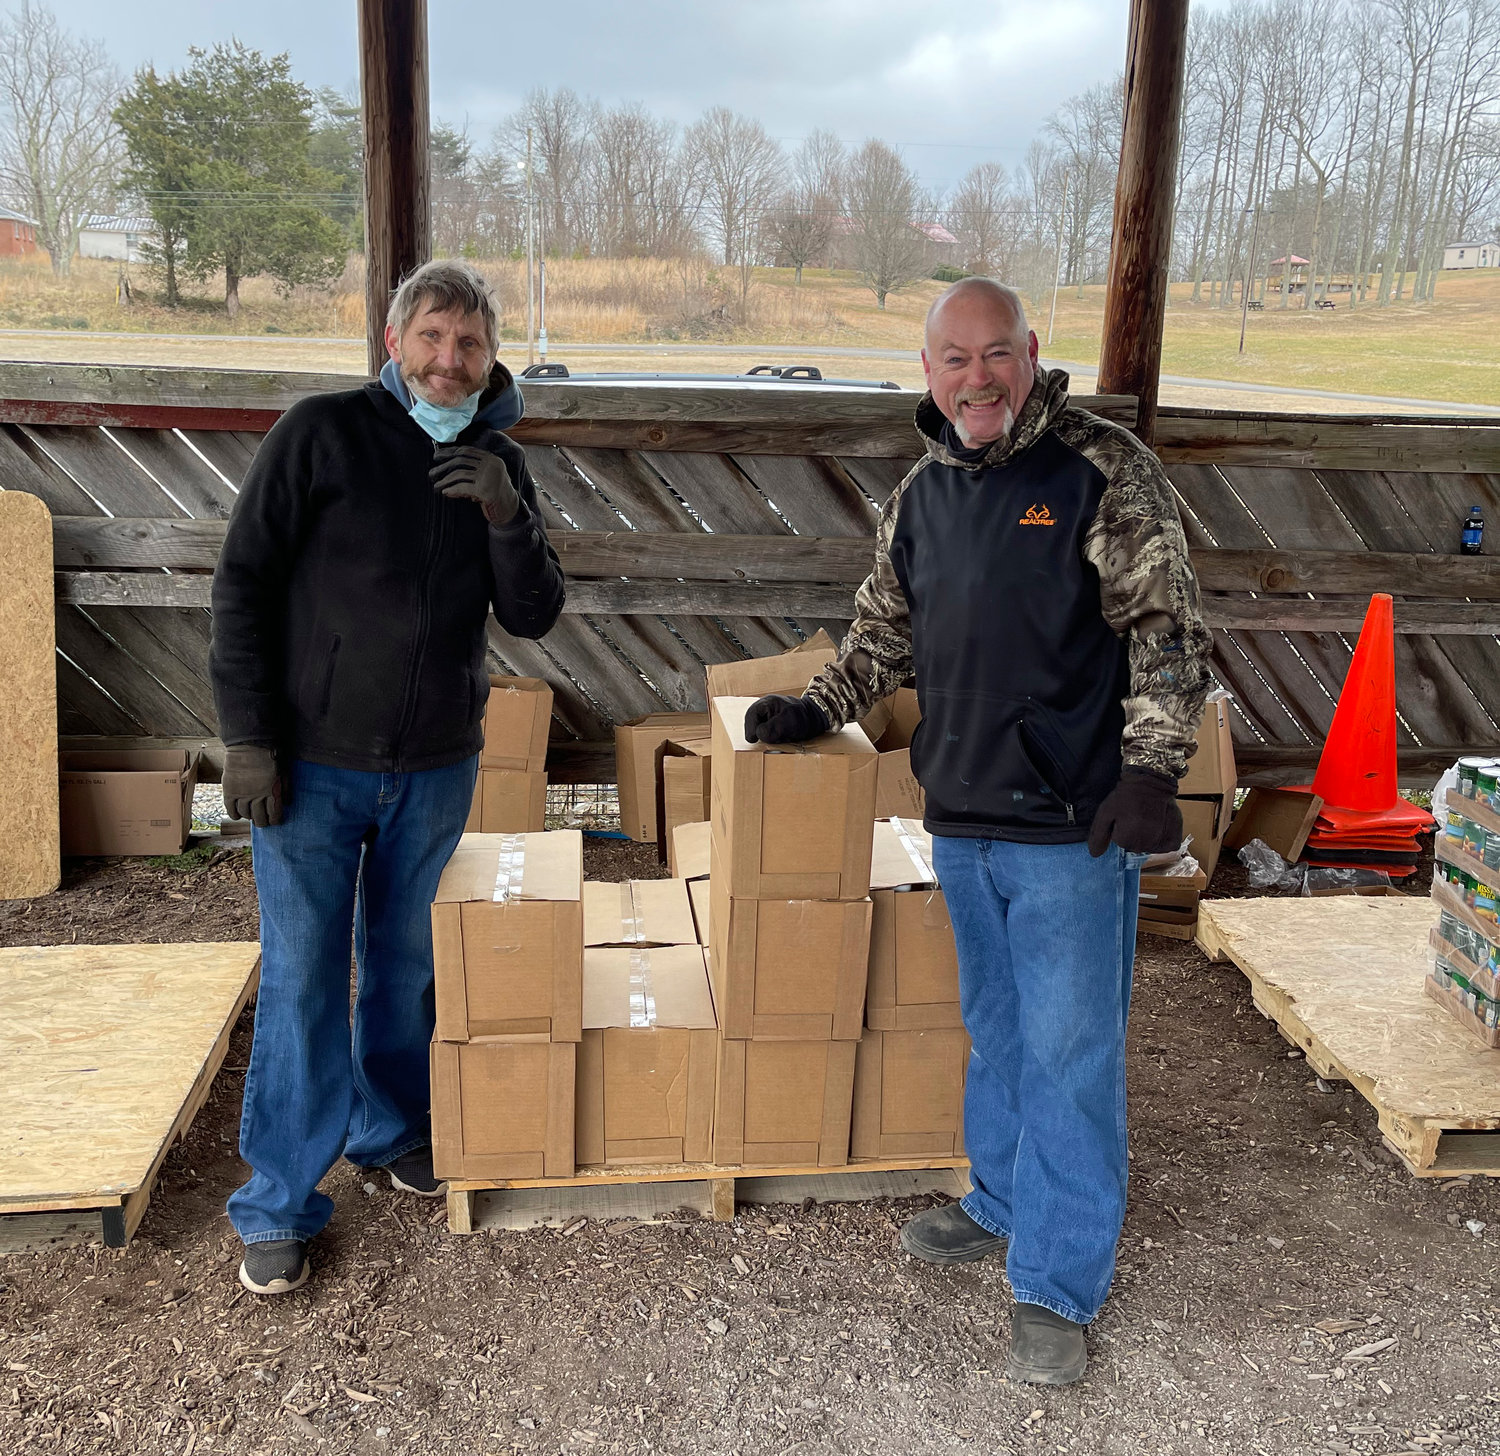 Pictured, from left: Danny McKeehan and William Moody. Moody has completed his hours and now enjoys coming out to help at UCHRA commodities distribution events.